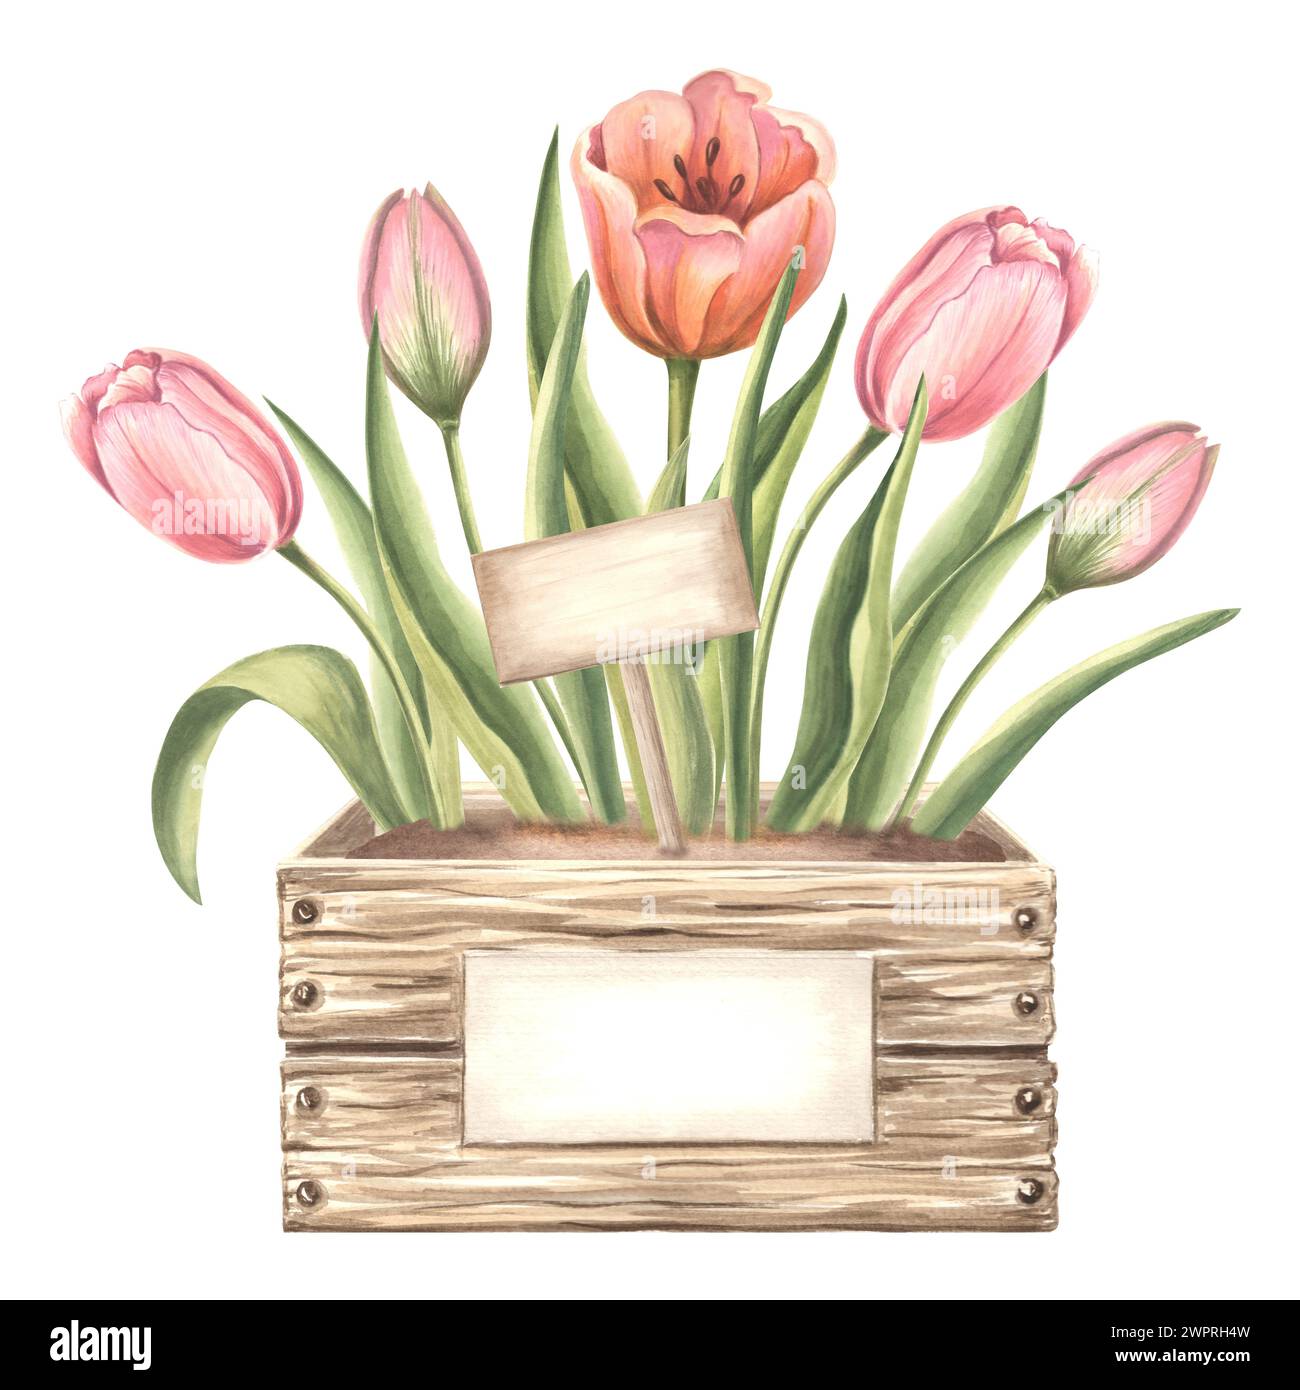 Tulips with leaves in wooden box with label. Spring garden flower. Isolated hand drawn watercolor botanical illustration. Floral drawing template for Stock Photo